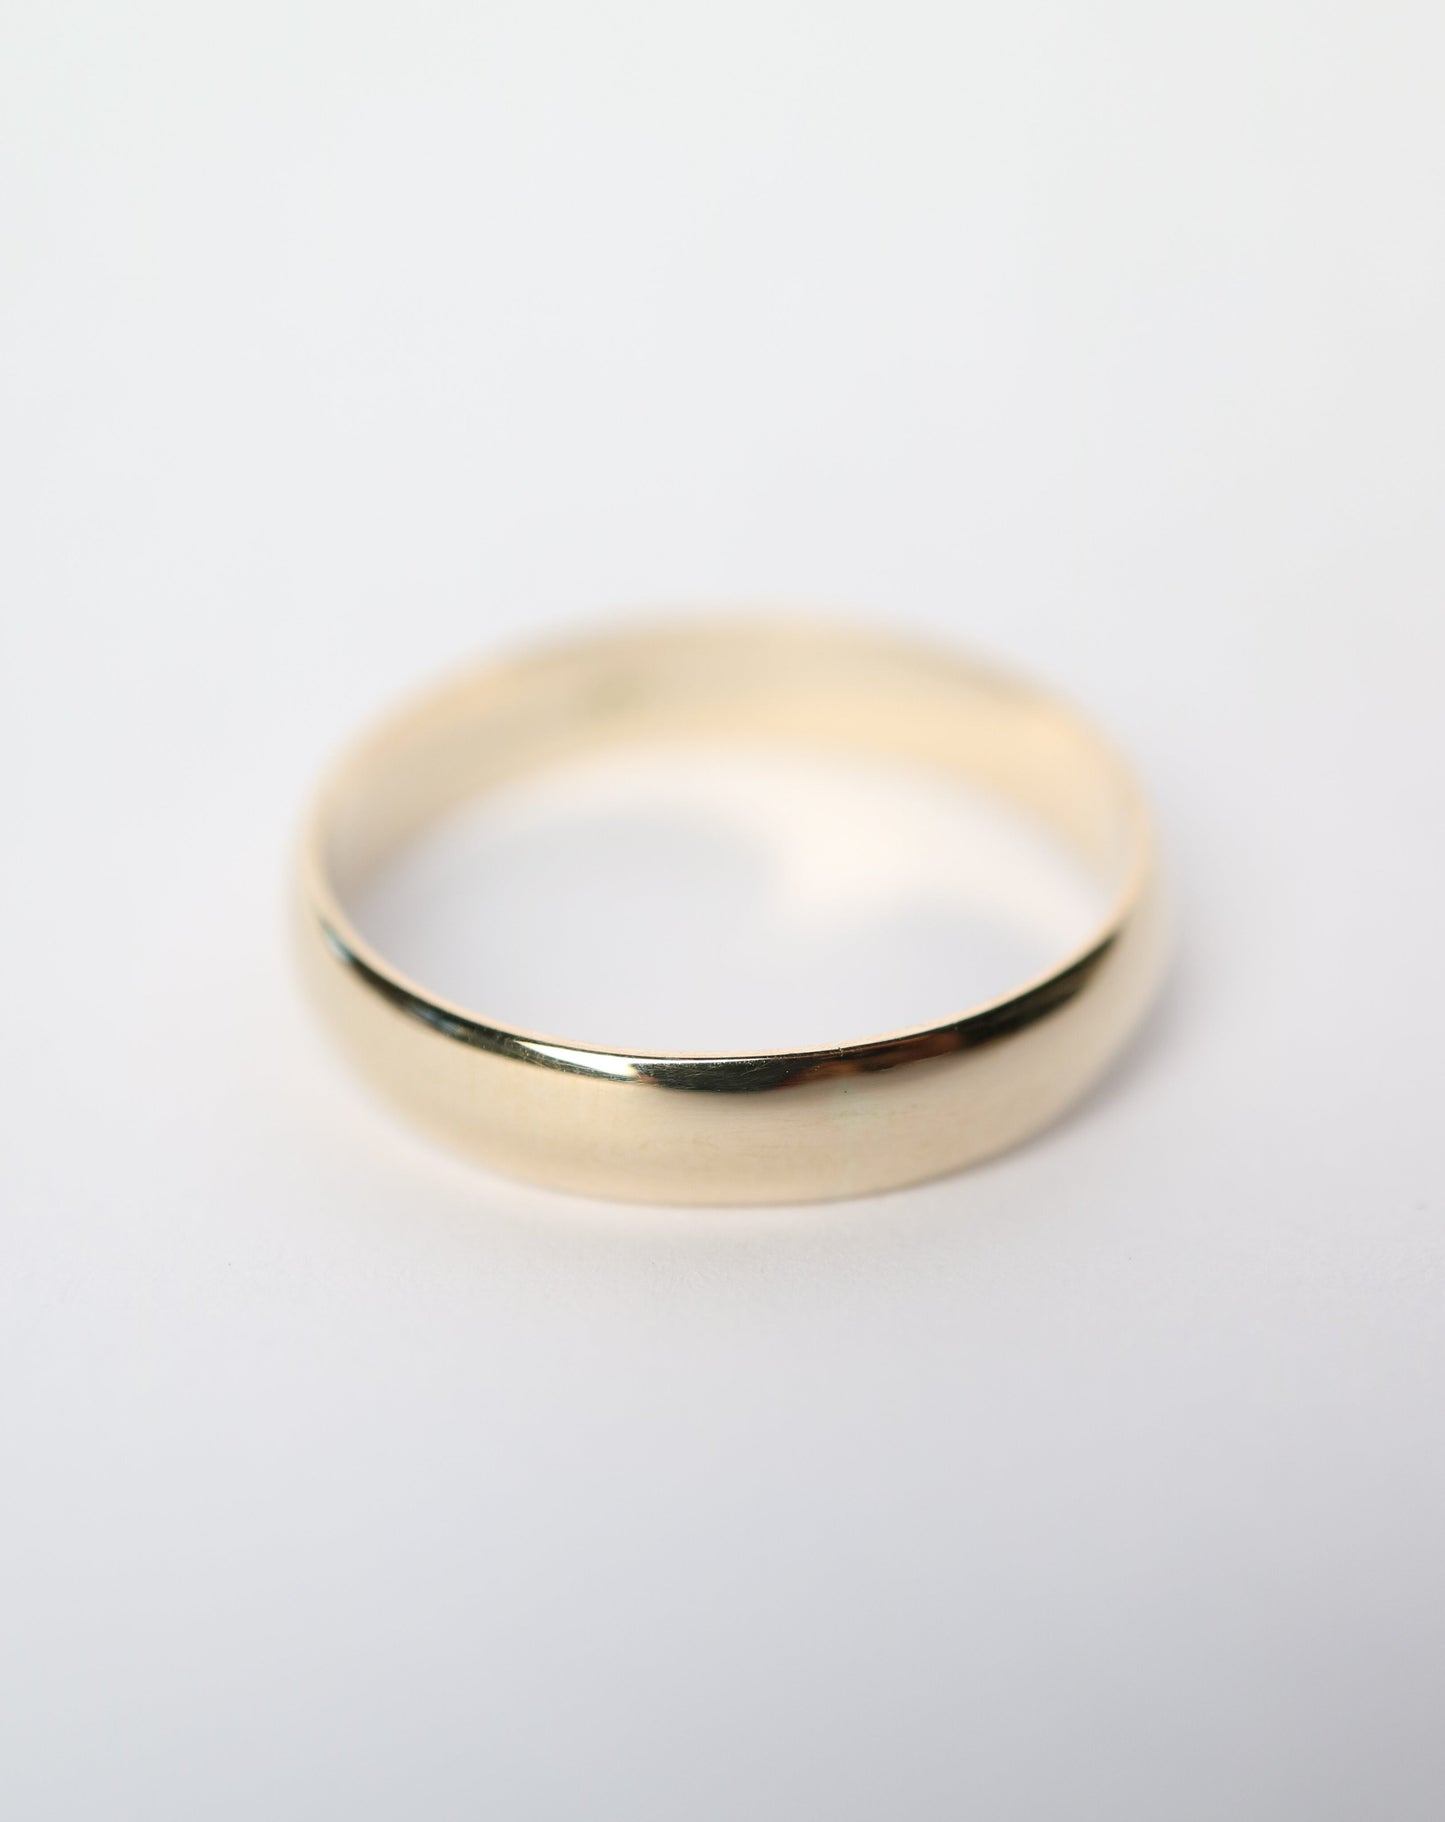 9ct gold Men's ring band 5mm width